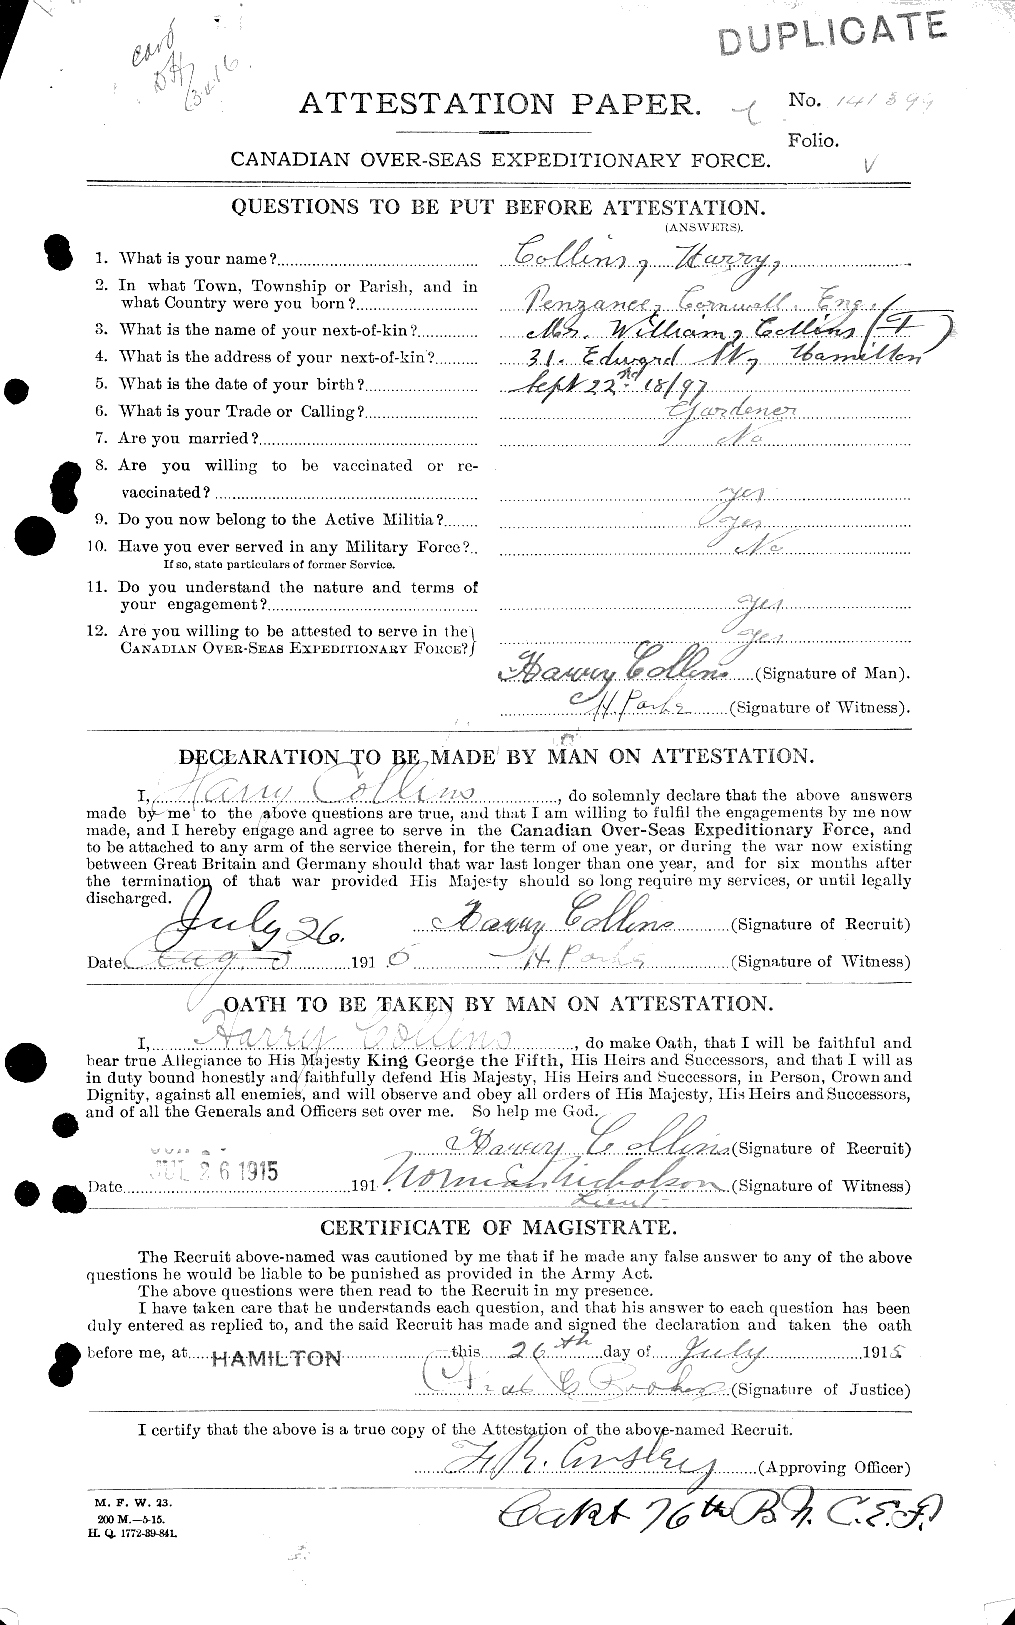 Personnel Records of the First World War - CEF 042260a